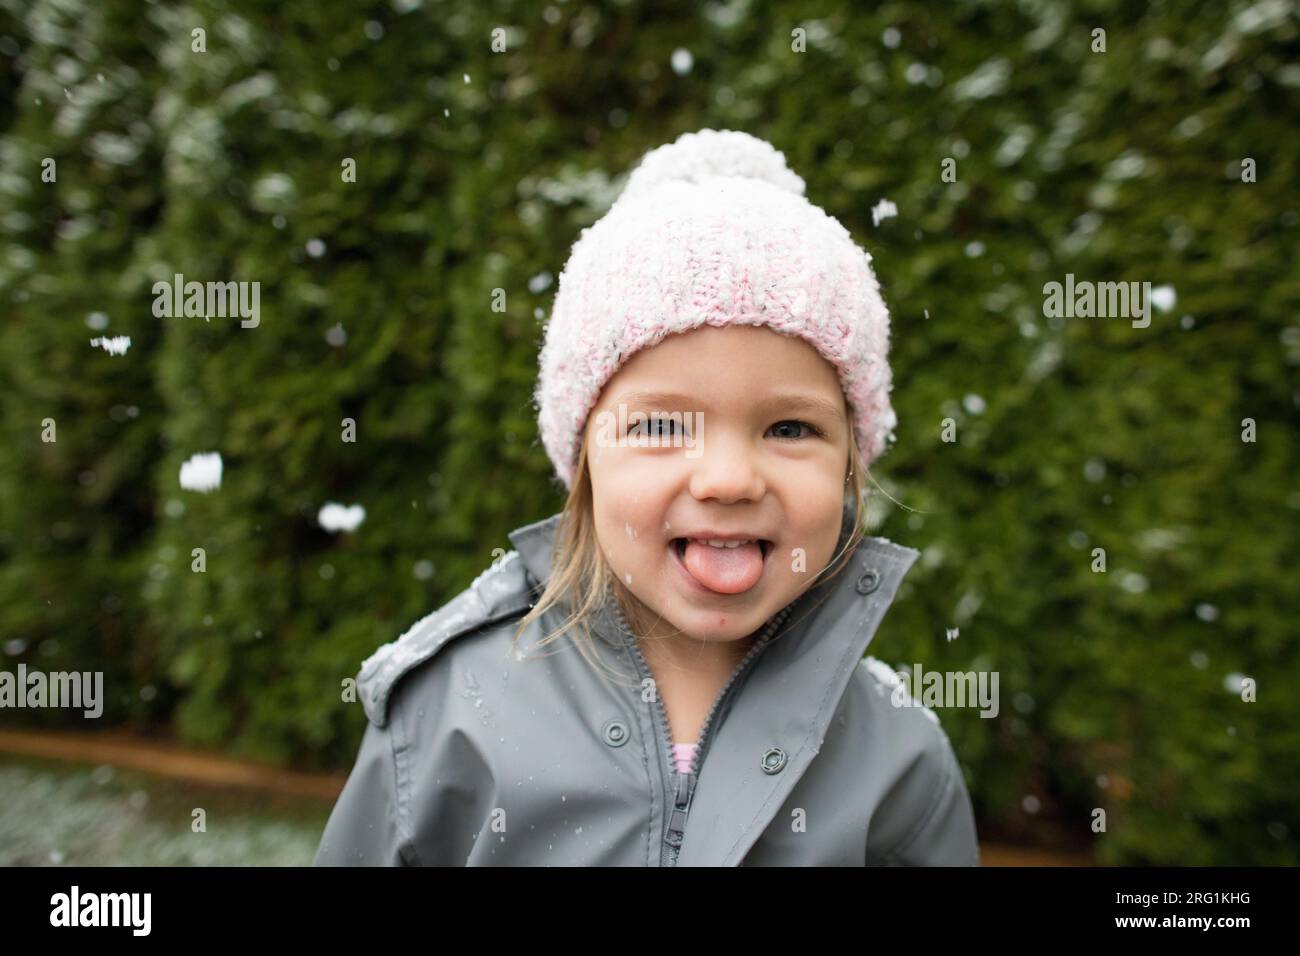 Cute young girl catches snowflakes with her tongue outside. Stock Photo